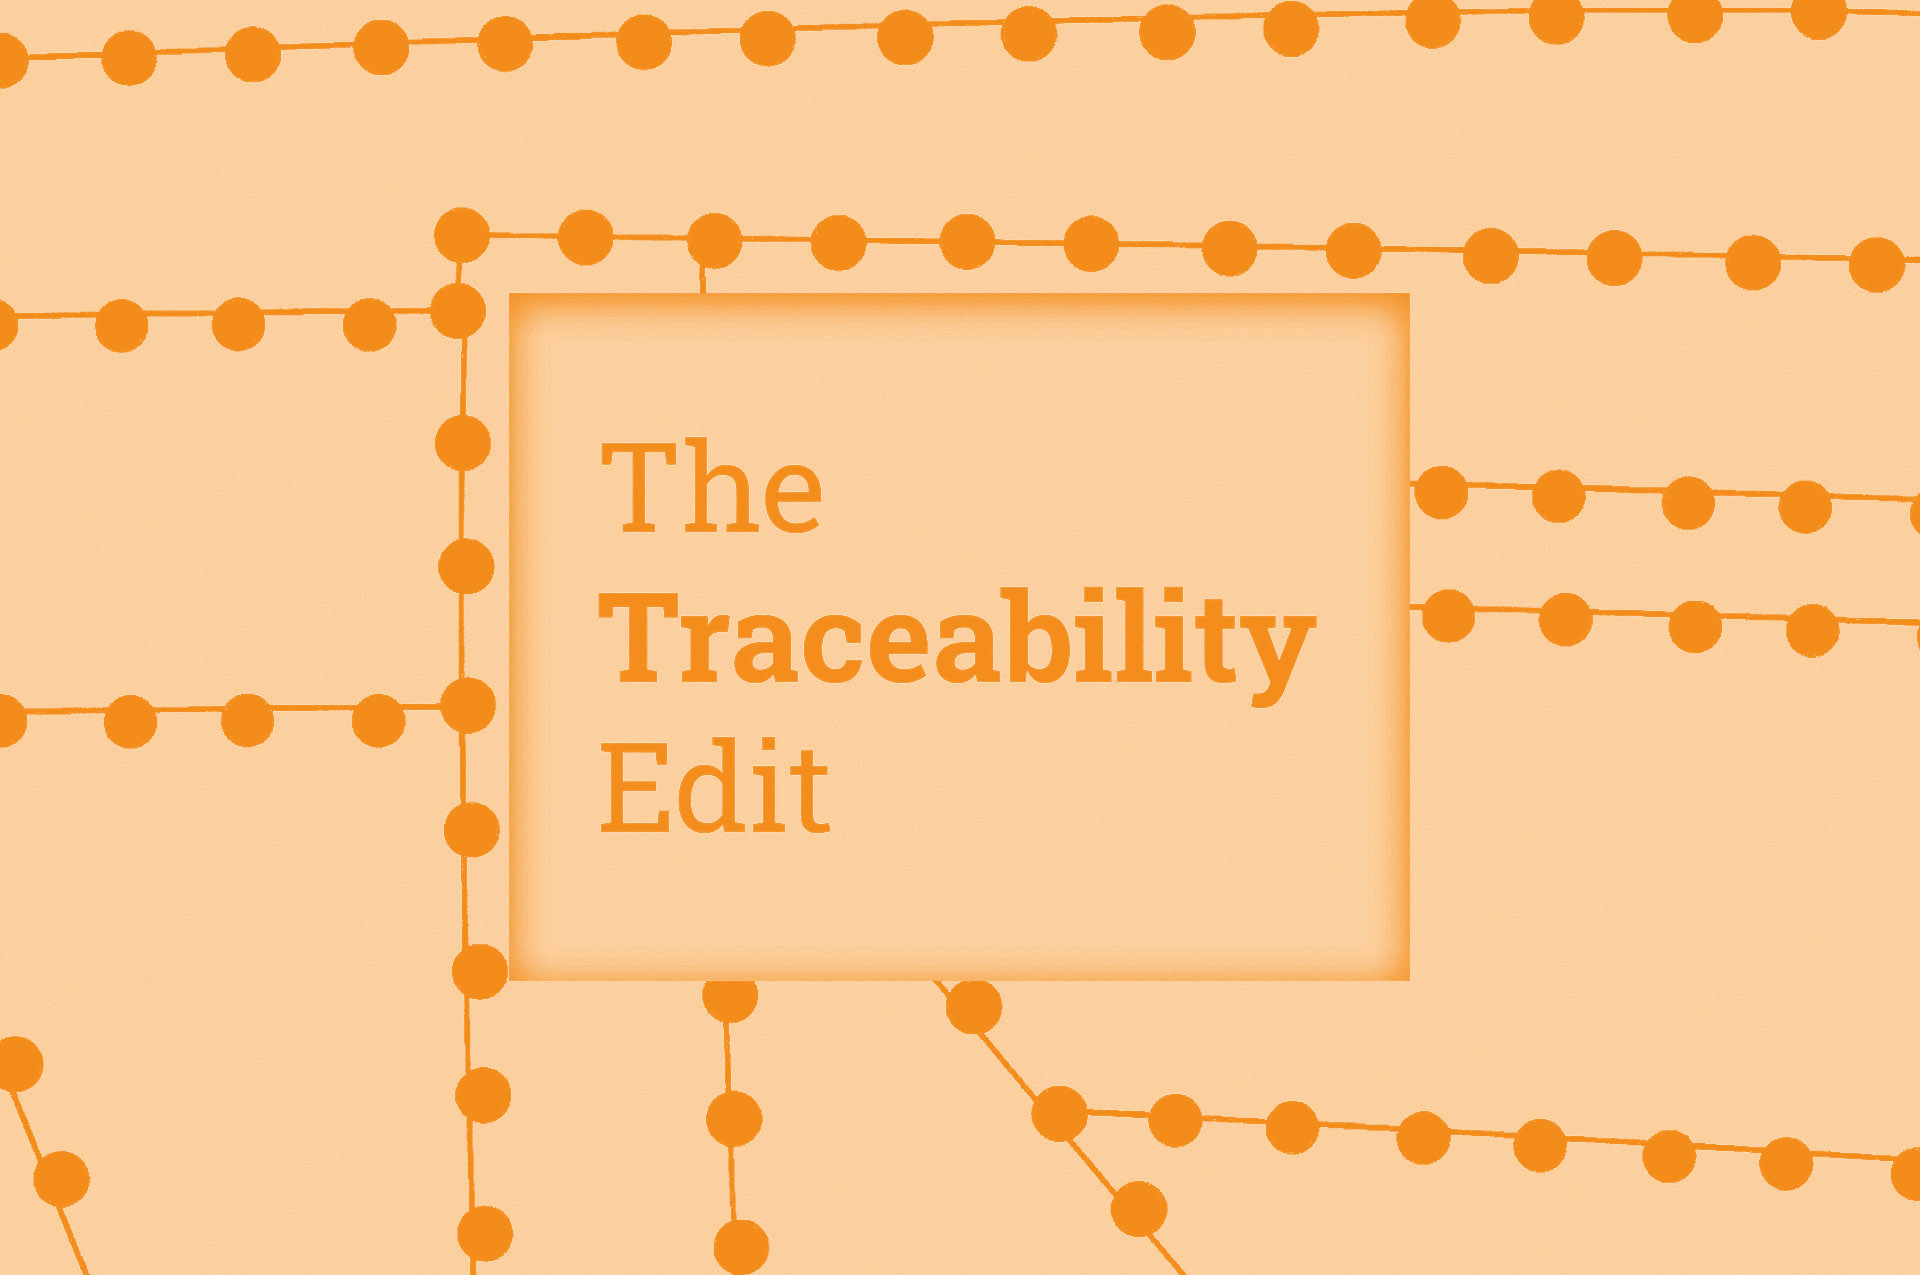 Traceability News to Read from February